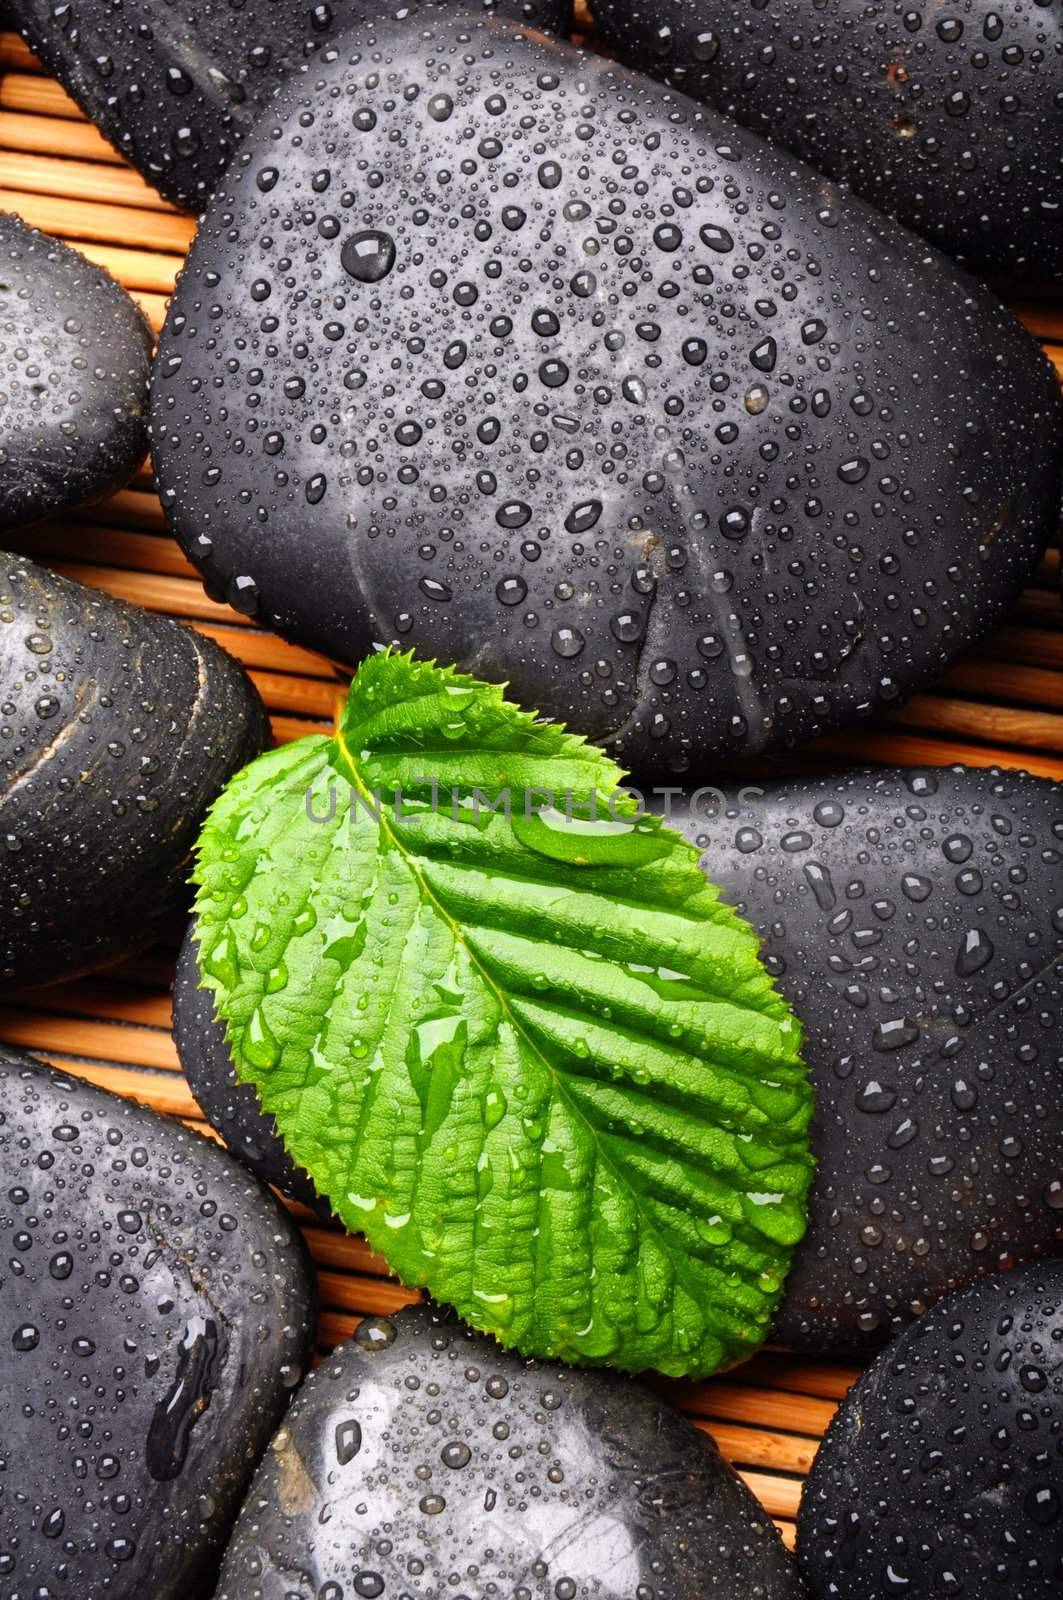 zen or spa stones with green leaf and water drops